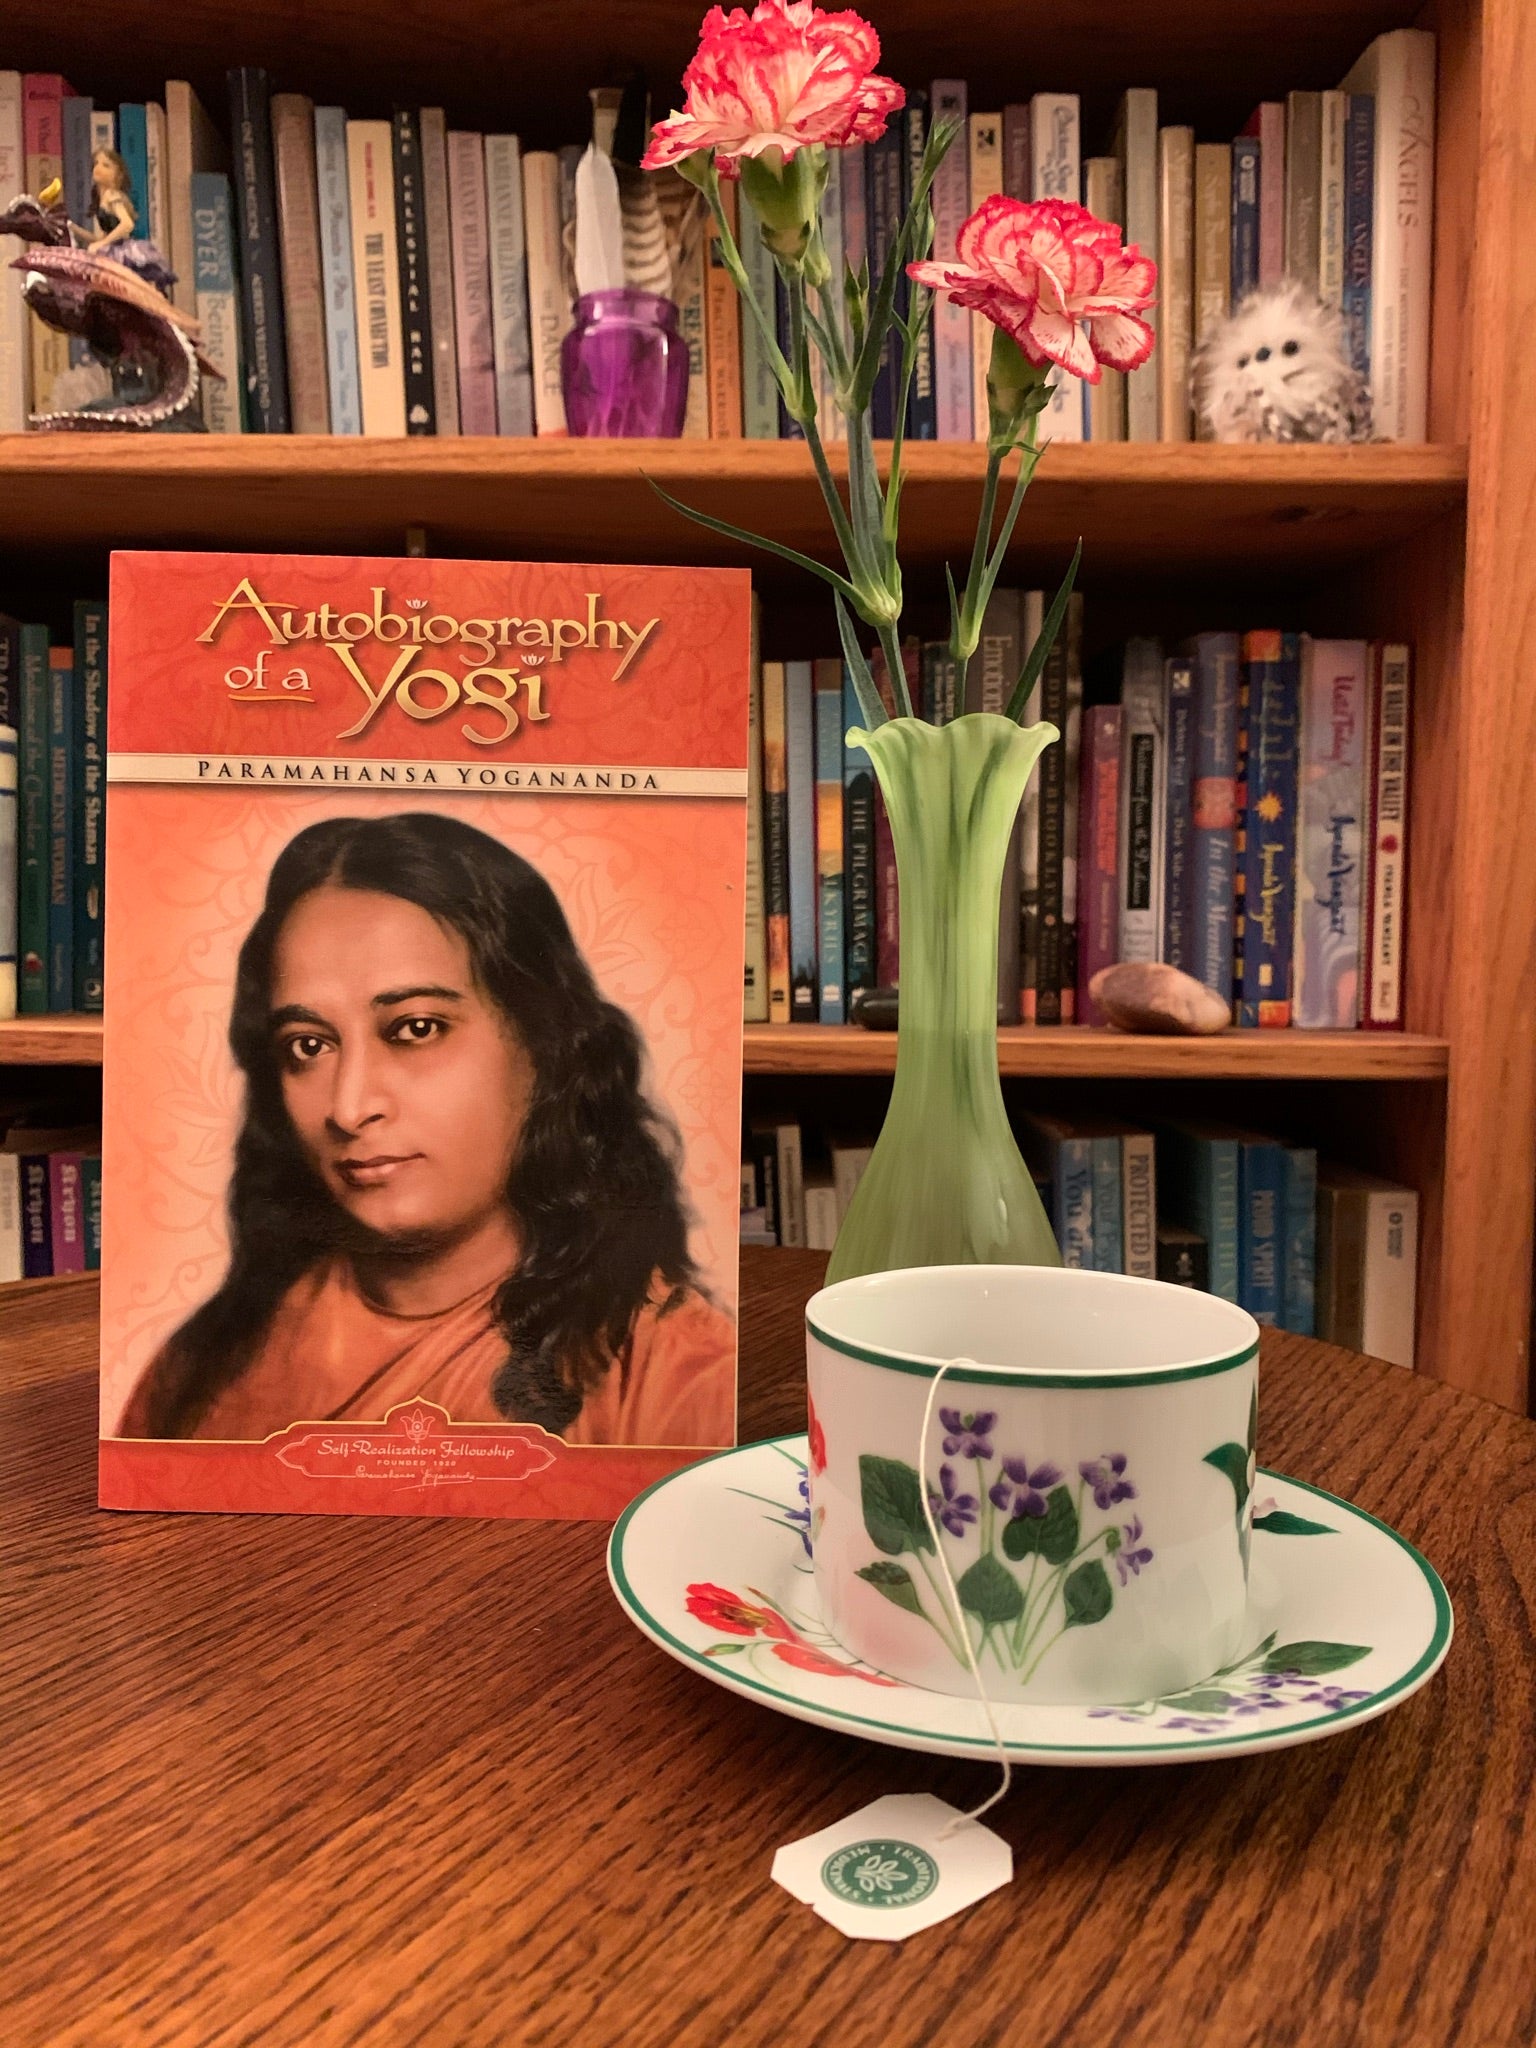 Autobiography of a Yogi by Paramahansa Yogananda is a most wonderful journey to take, walking in Yogananda's footsteps as he moves through his life - and what an amazing and magical life it was. He was a great spiritual teacher and Yogi. The book was "named one of the best spiritual books of the 20th century. Cost is $12.50